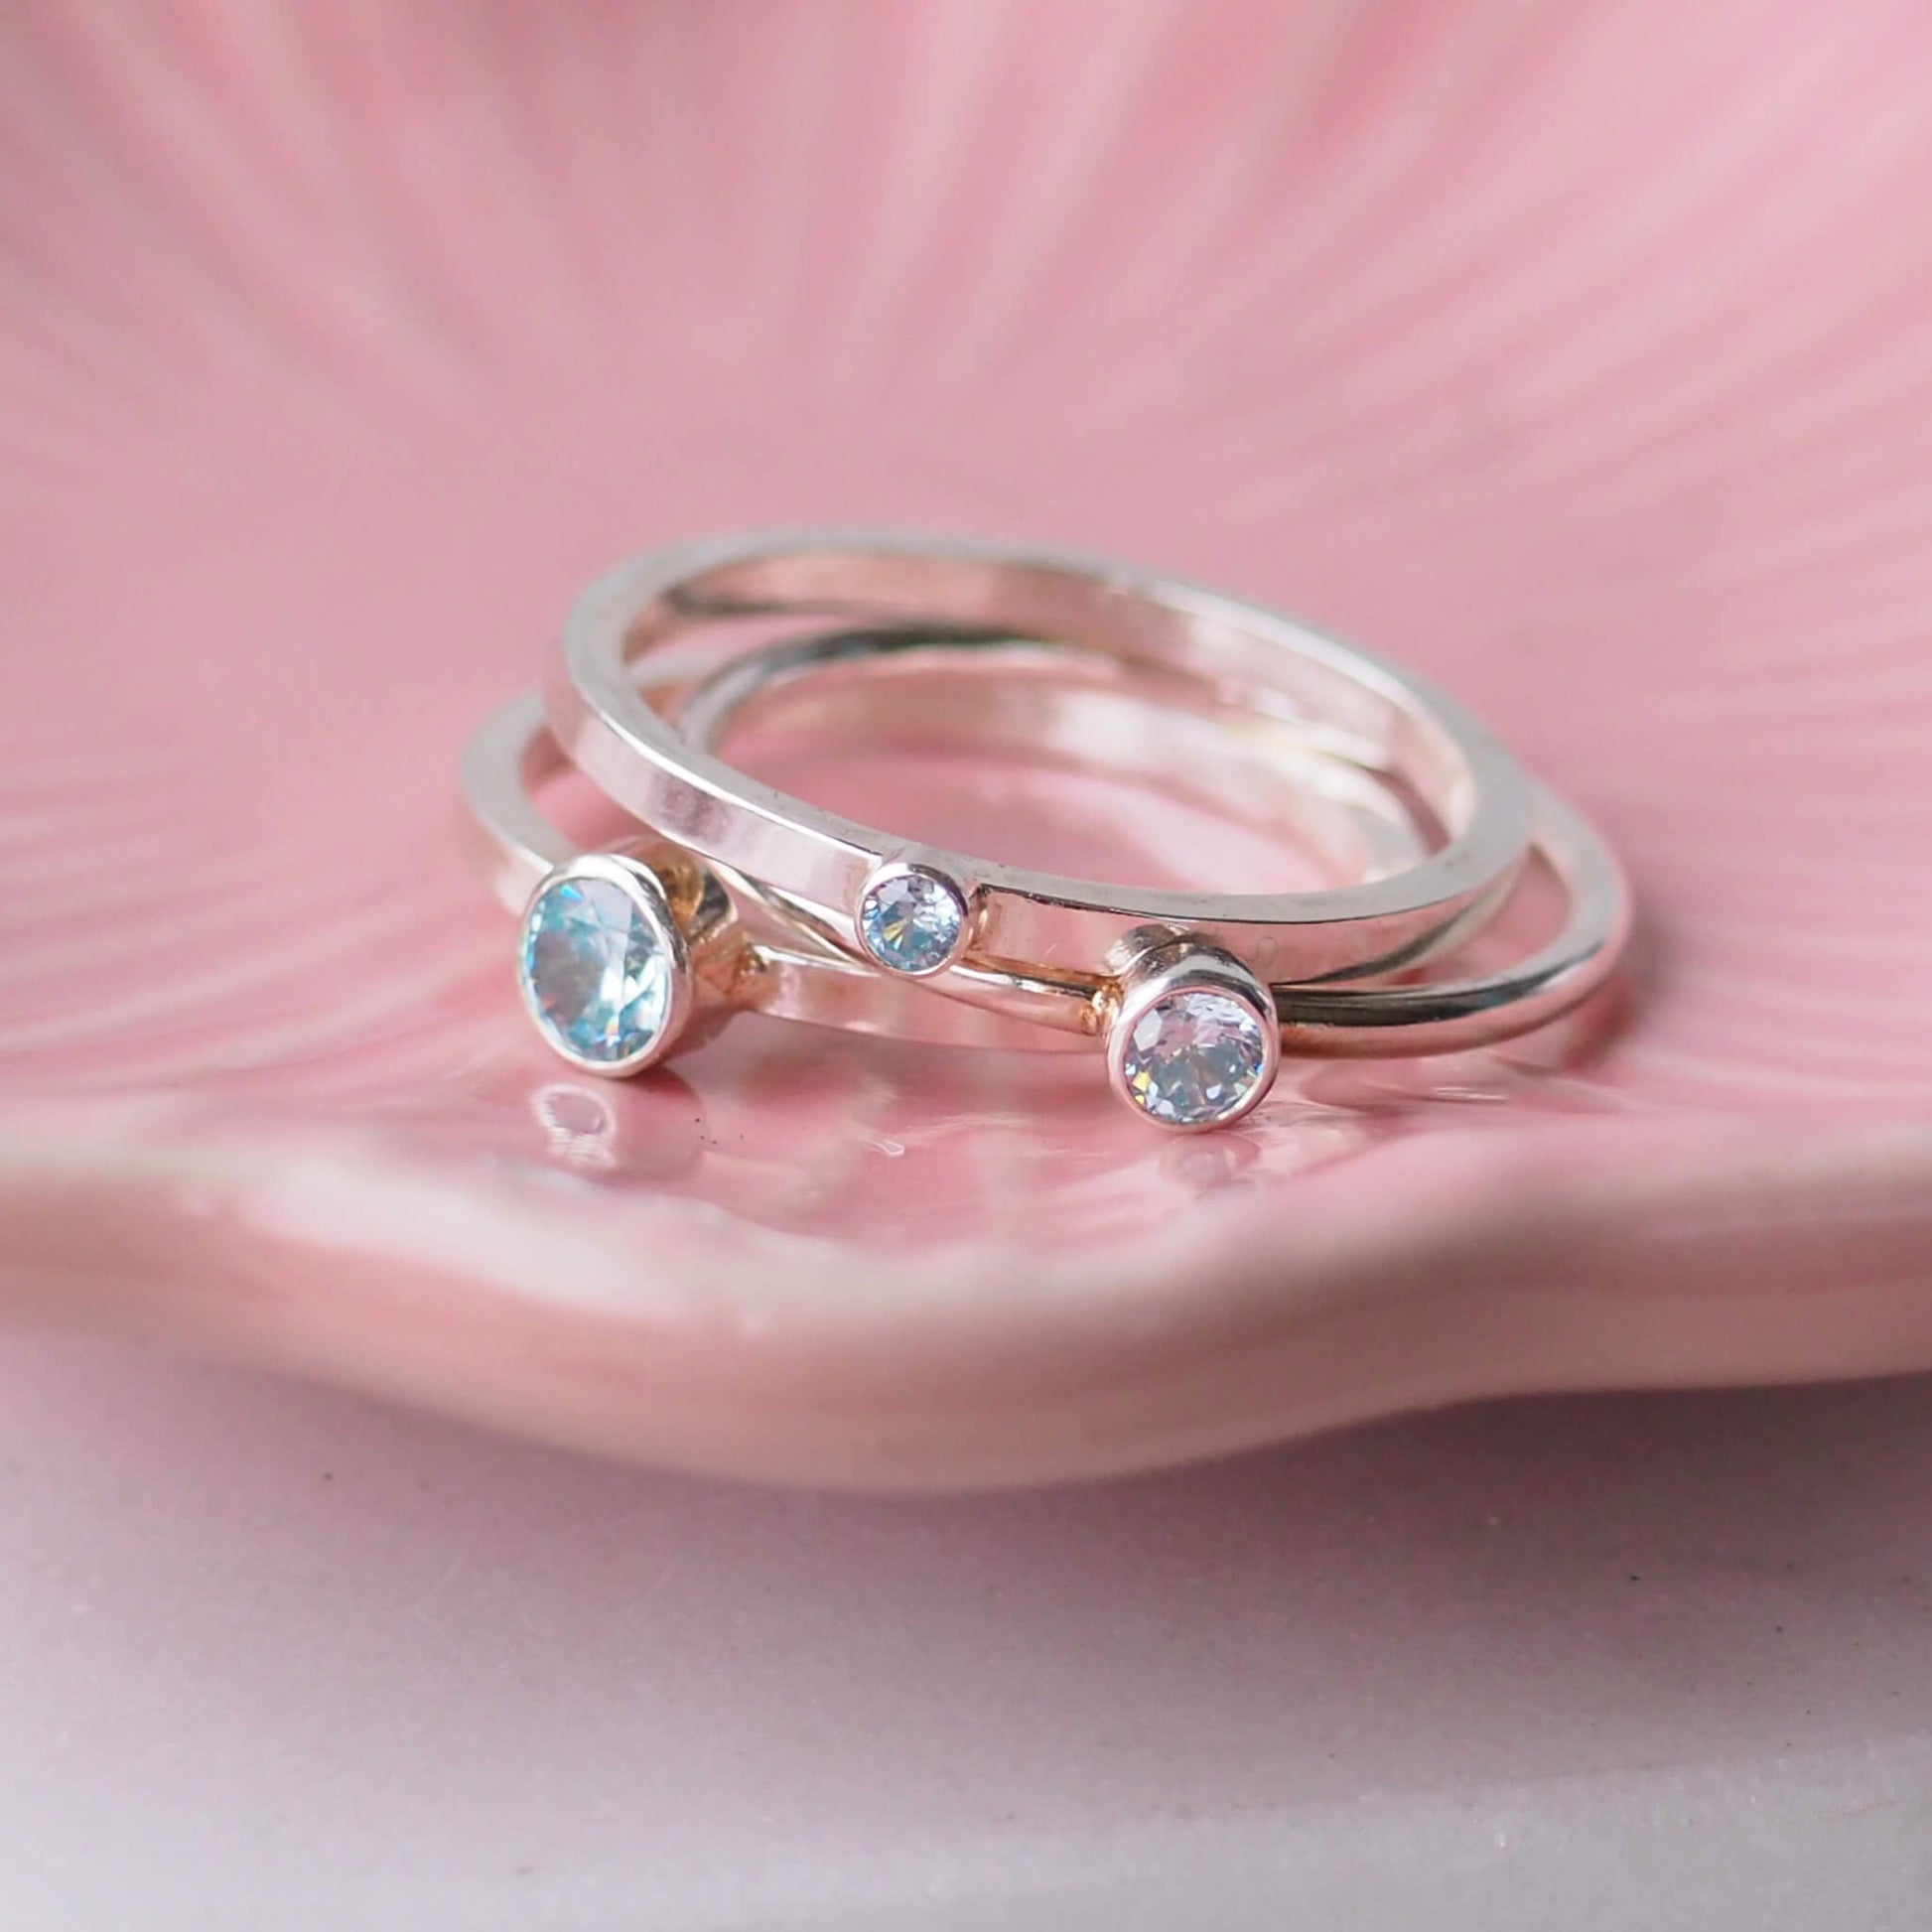 Set of three Aquamarine cubic zirconia rings loose on a delicate pink plate. Handmade by maram jewellery in Scotland UK